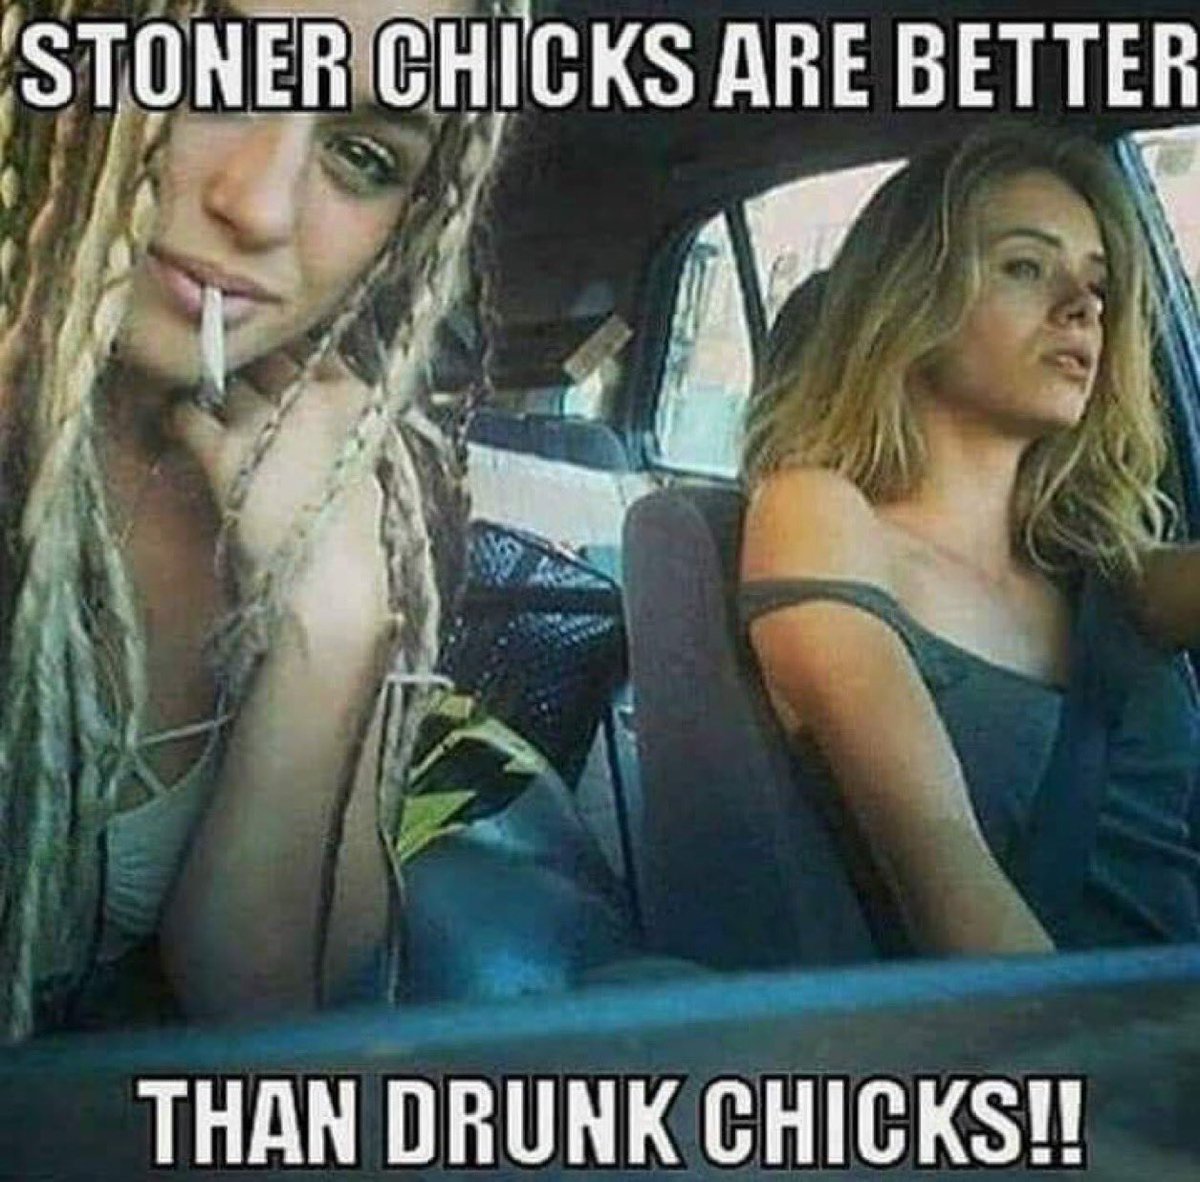 Do you like Stoner chicks?  Yes or No